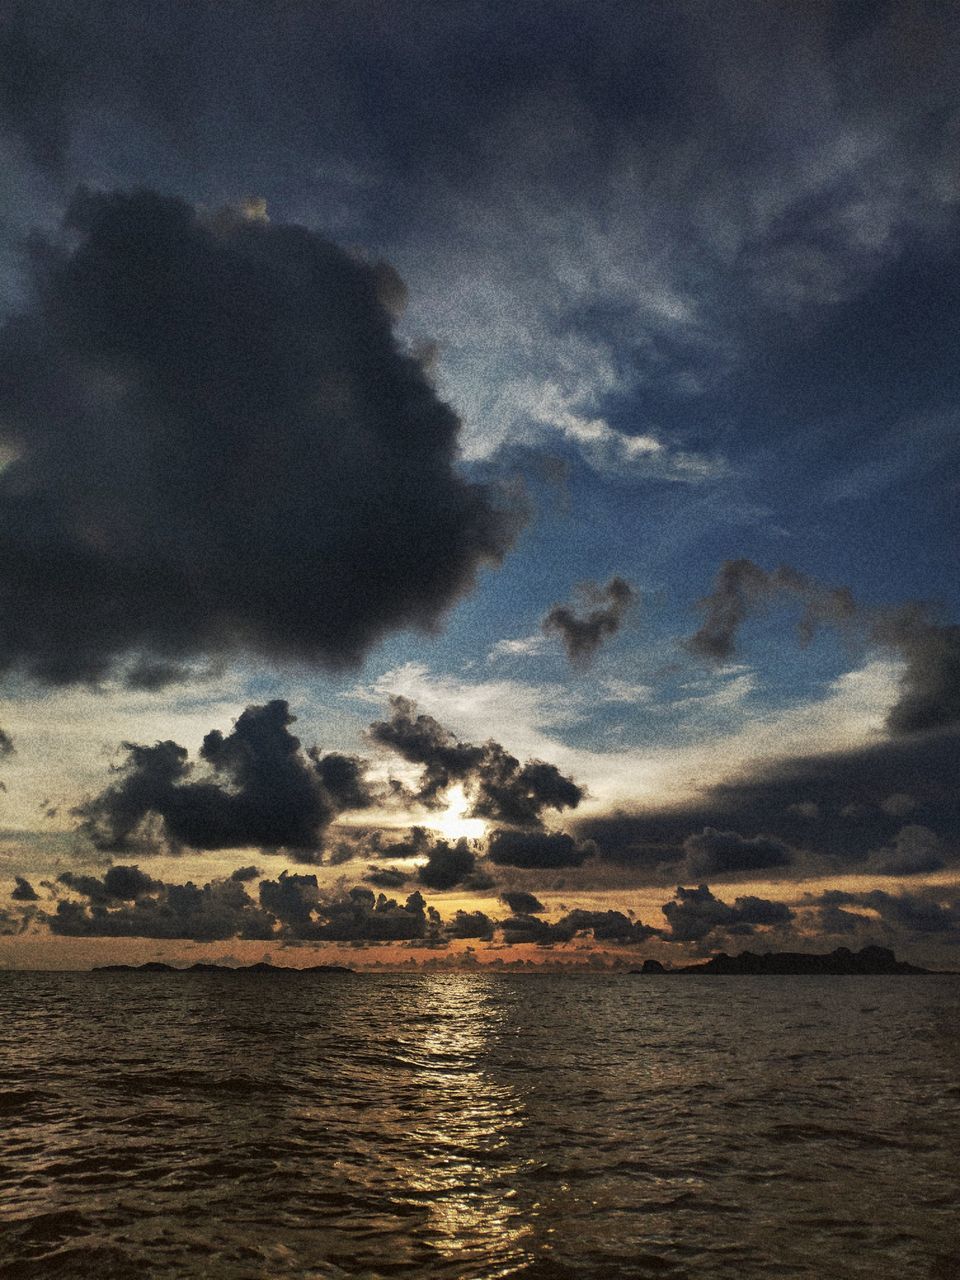 sky, cloud, water, sea, beauty in nature, ocean, scenics - nature, nature, horizon, sunset, coast, evening, no people, dramatic sky, tranquility, land, dusk, beach, wave, environment, reflection, sunlight, outdoors, tranquil scene, shore, storm, seascape, horizon over water, wind wave, cloudscape